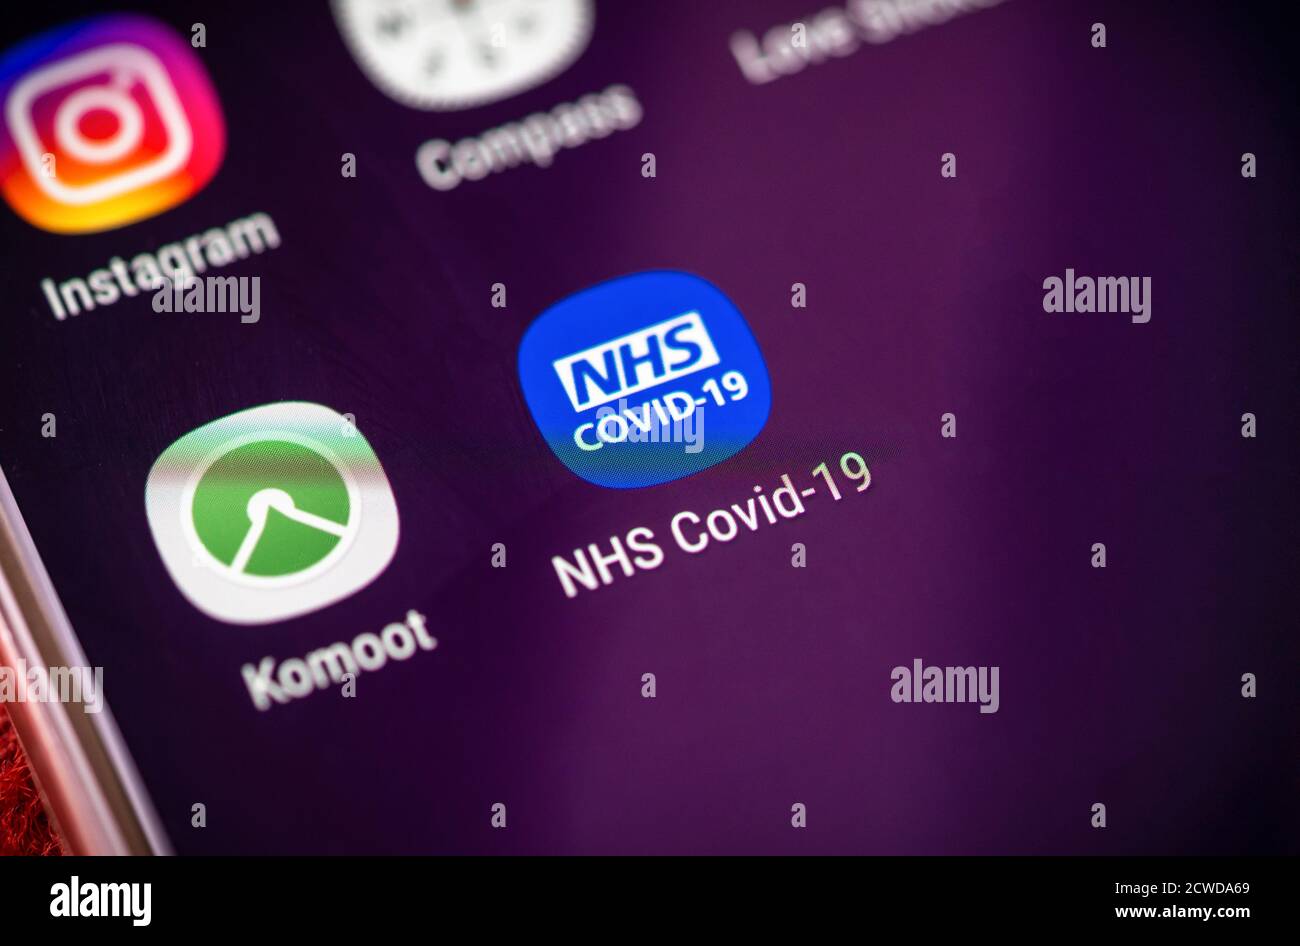 NHS Covid-19 app icon on a mobile phone screen display, the app launched on 24 September 2020 to be used as a contact tracing app in England and Wales, UK Stock Photo